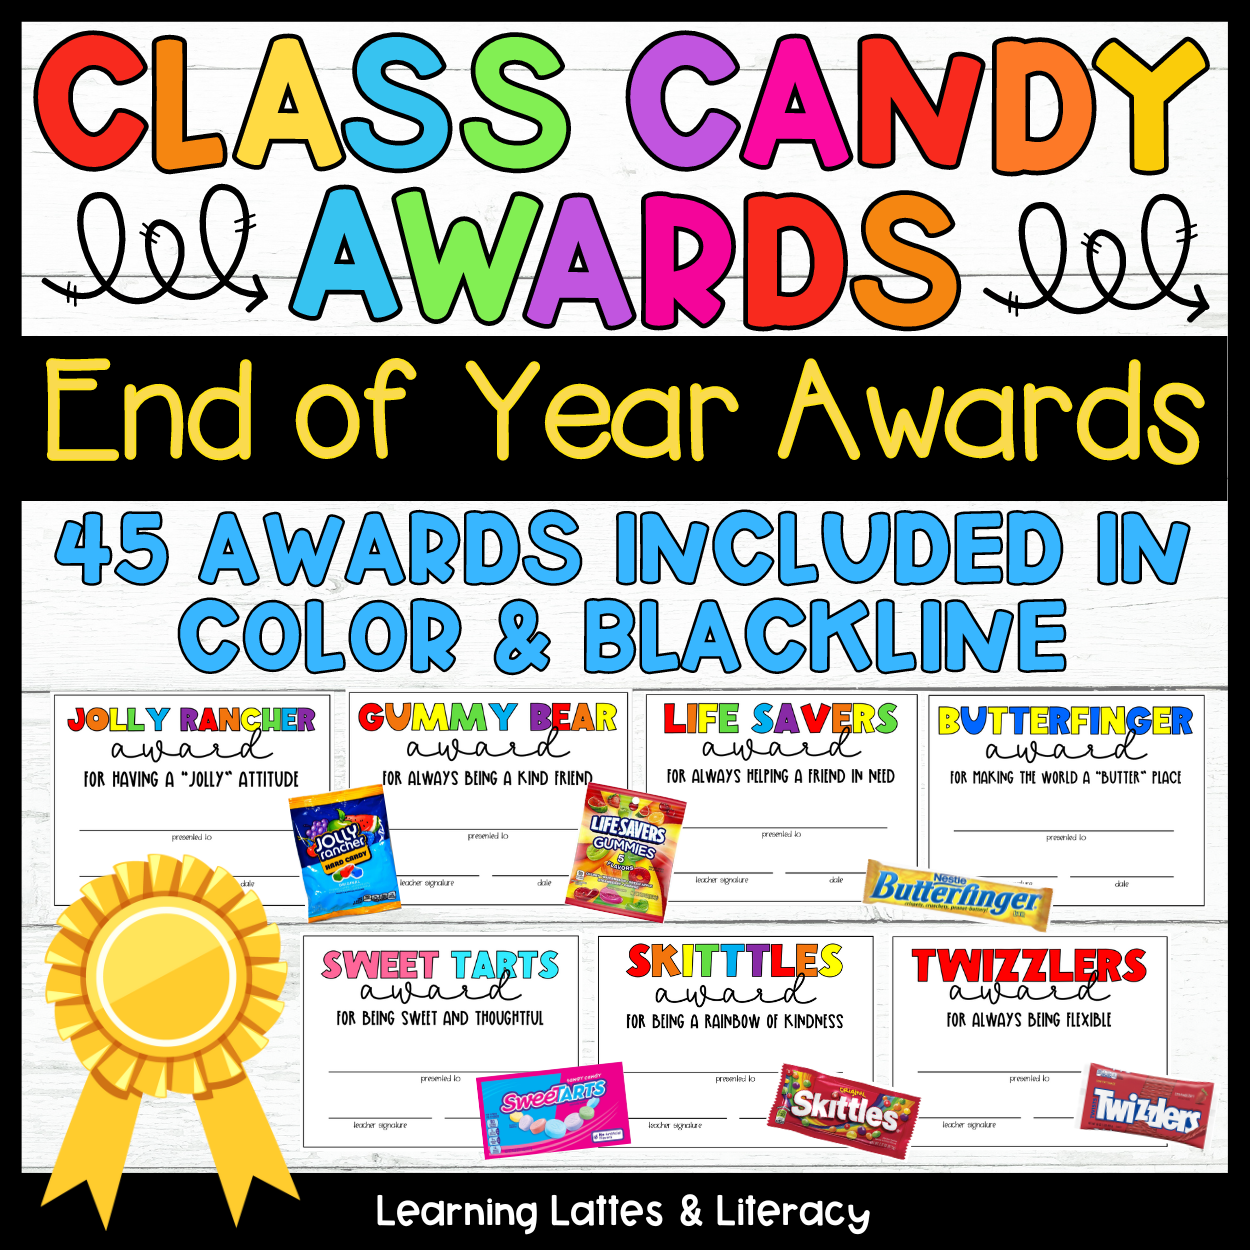 Editable Candy Awards Class Awards End of Year Class Student Awards Day Ceremony Student Certificates Candy Bar Awards